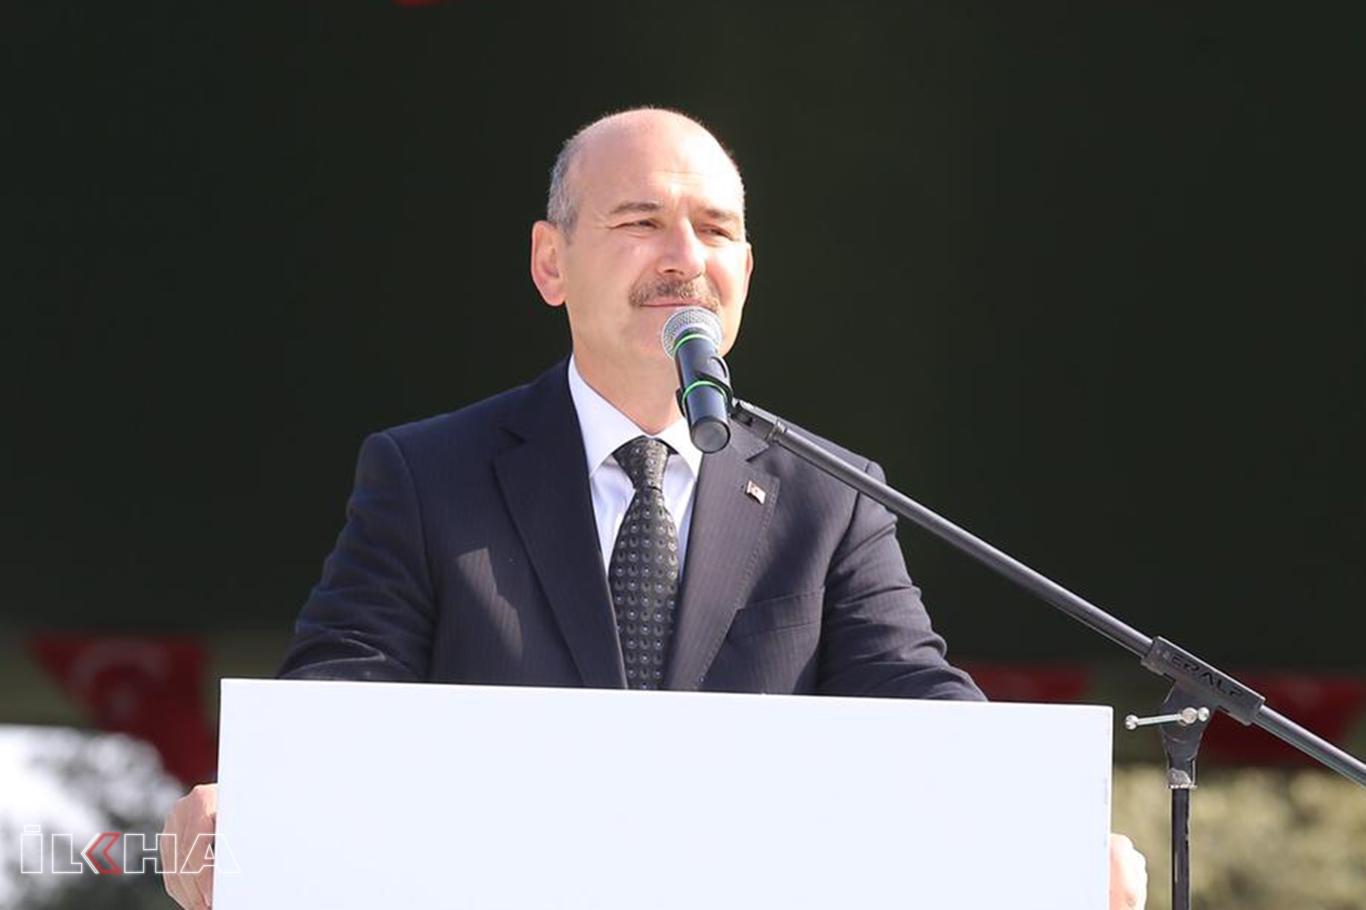 354,000 Syrians have returned to their country: Soylu